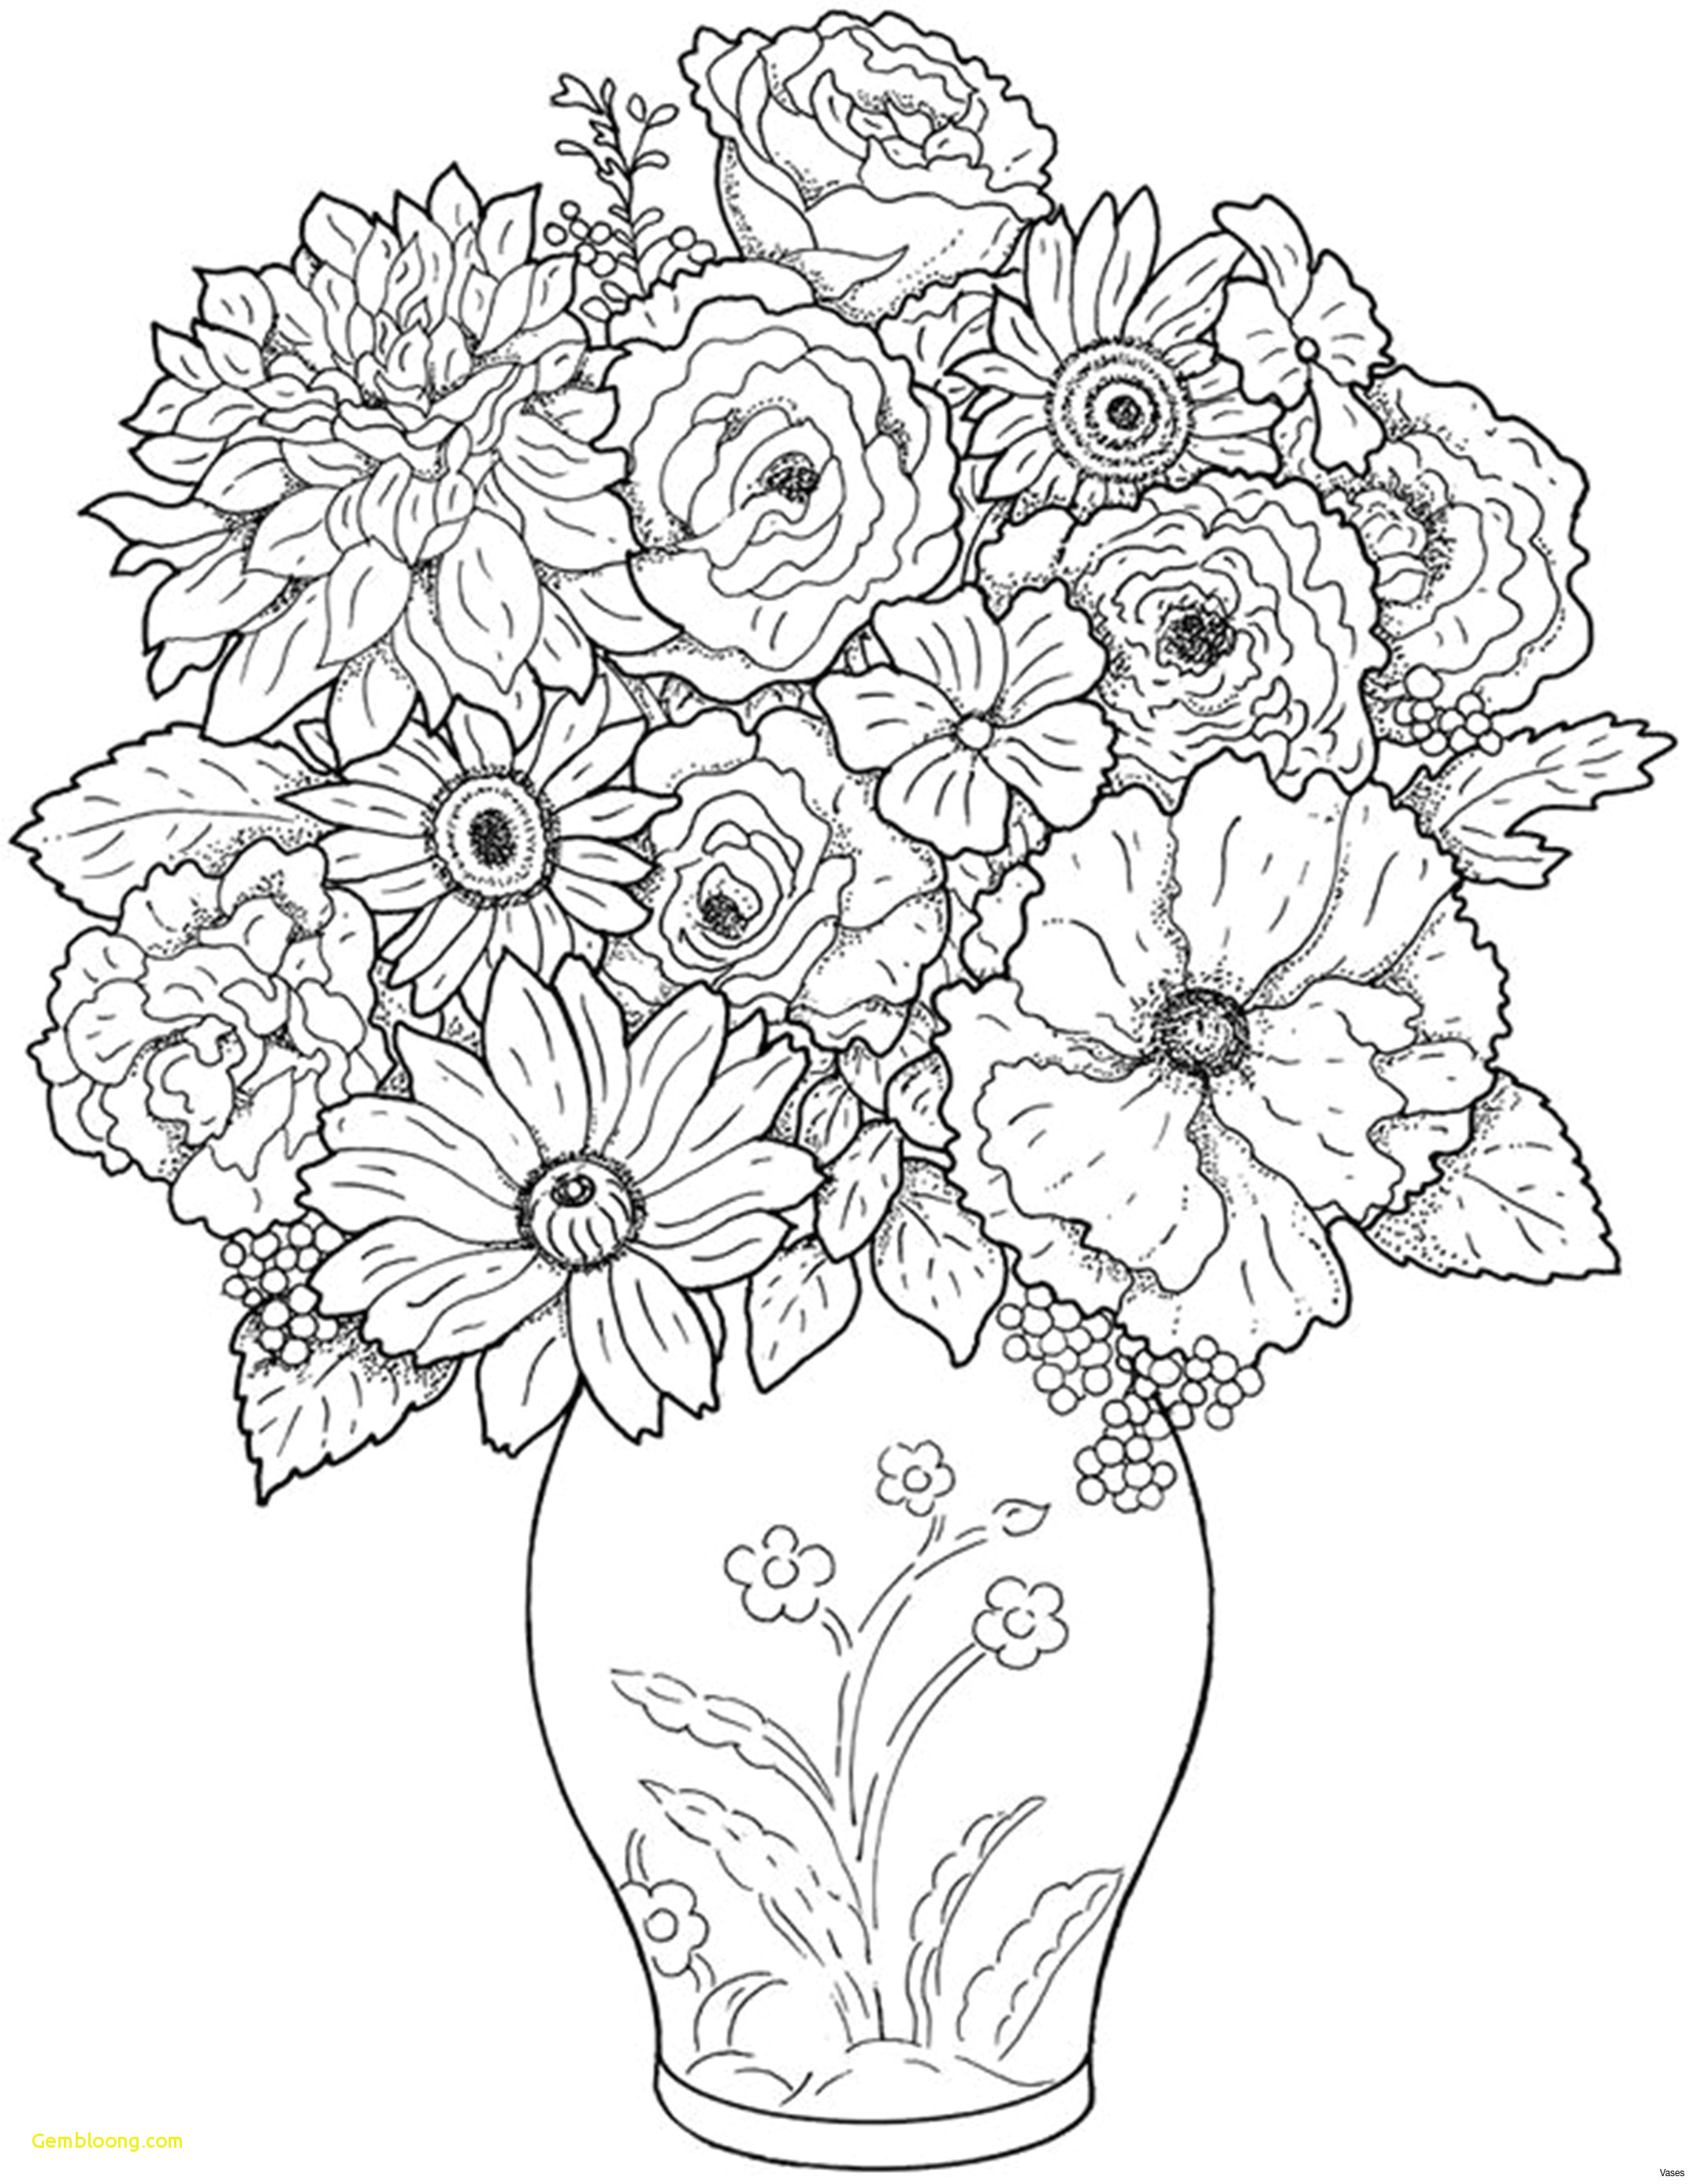 23 drawings of flowers peaceful cool vases flower vase coloring page pages flowers in a top i 0d ruva of drawings of flowers jpg